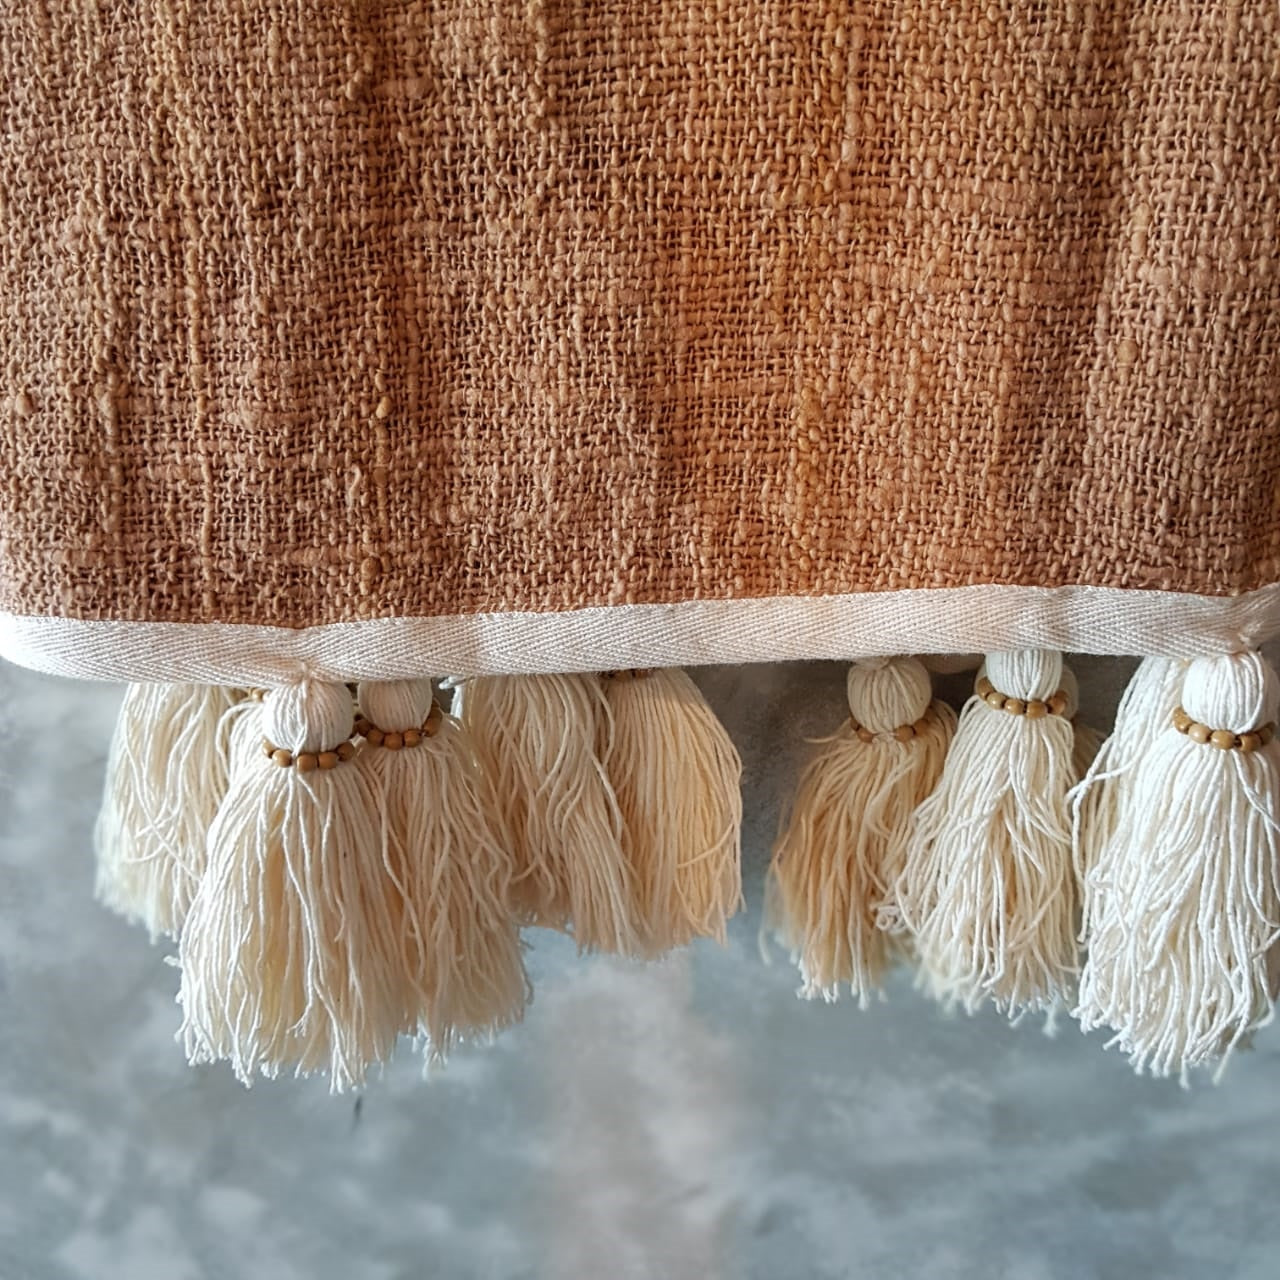 Soft Caramel Brown Throw Blanket With Tassels